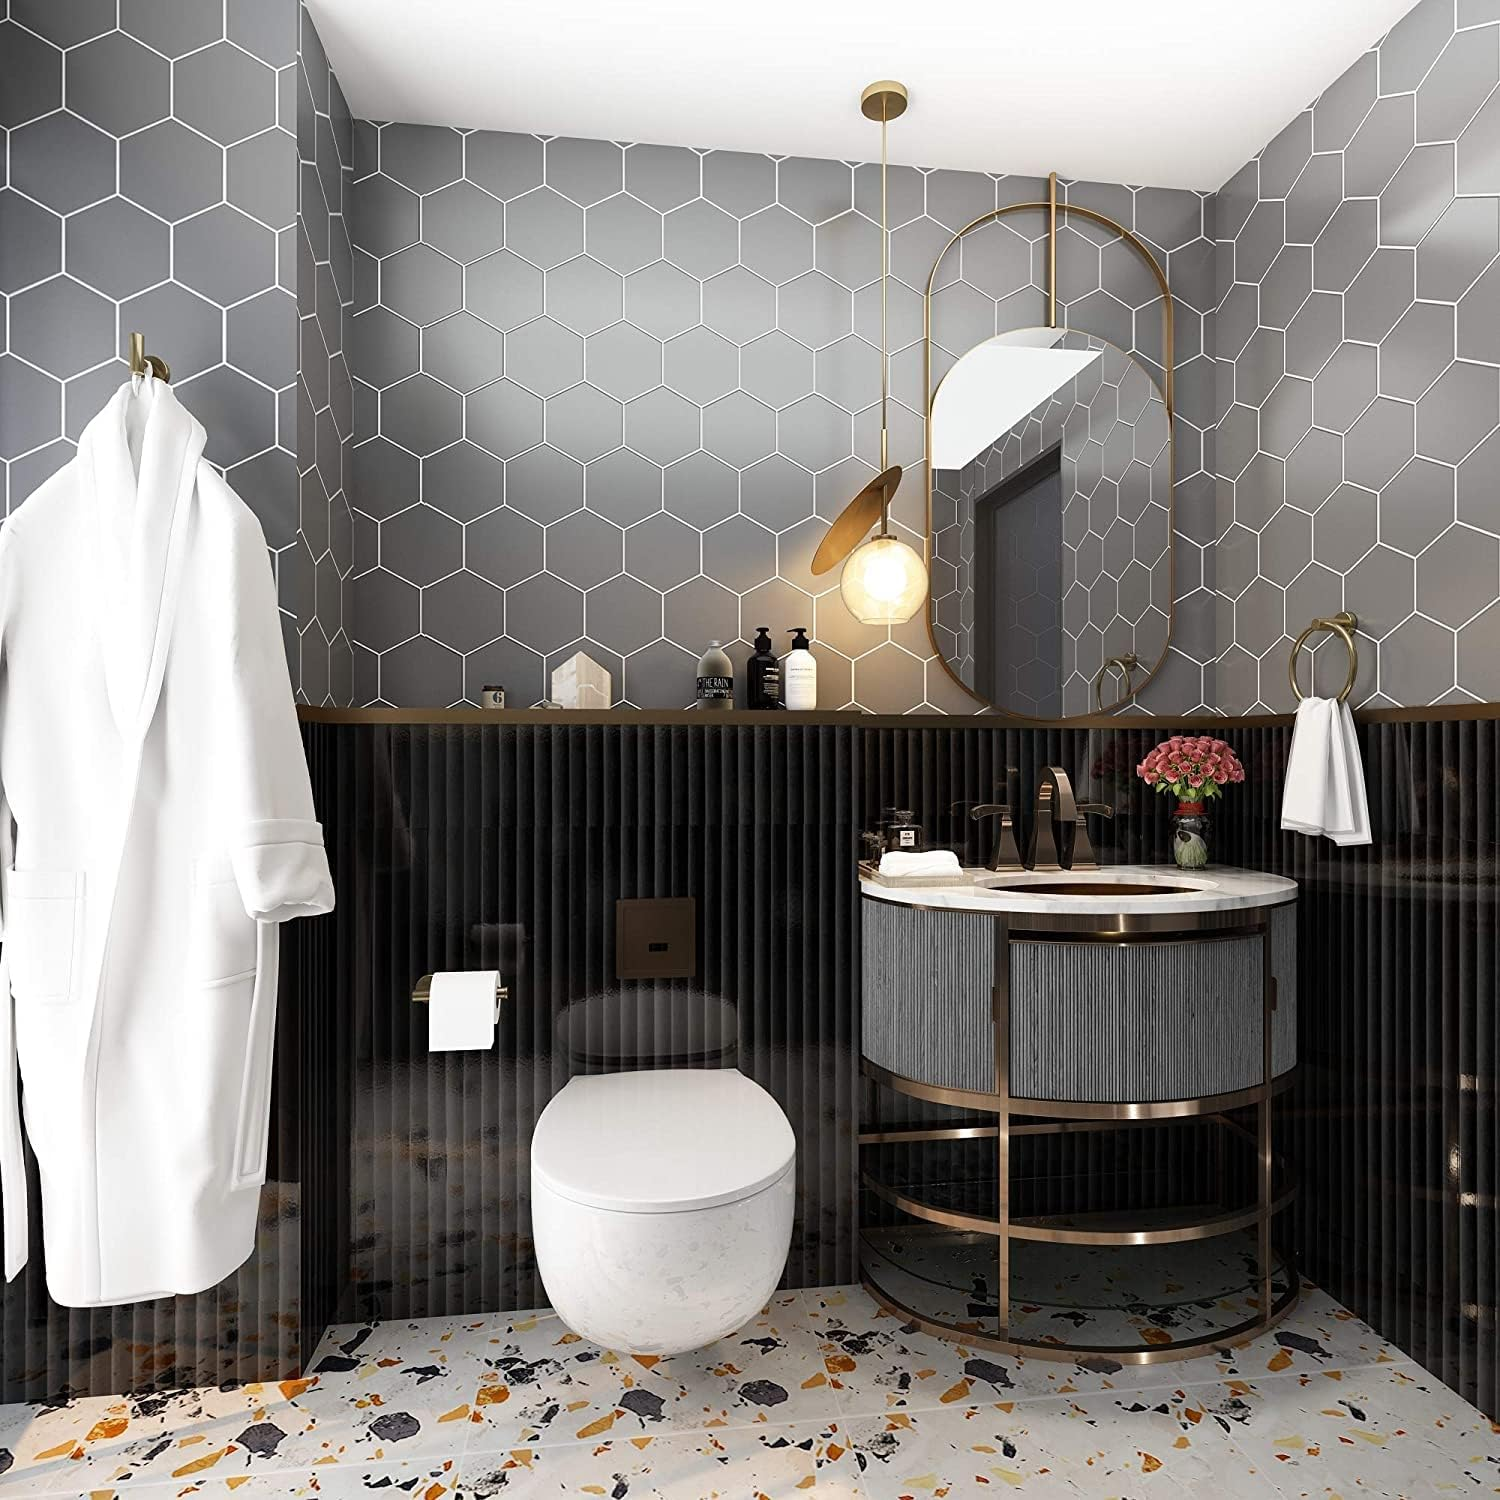 Gold bathroom accessories in a sophisticated bathroom design.